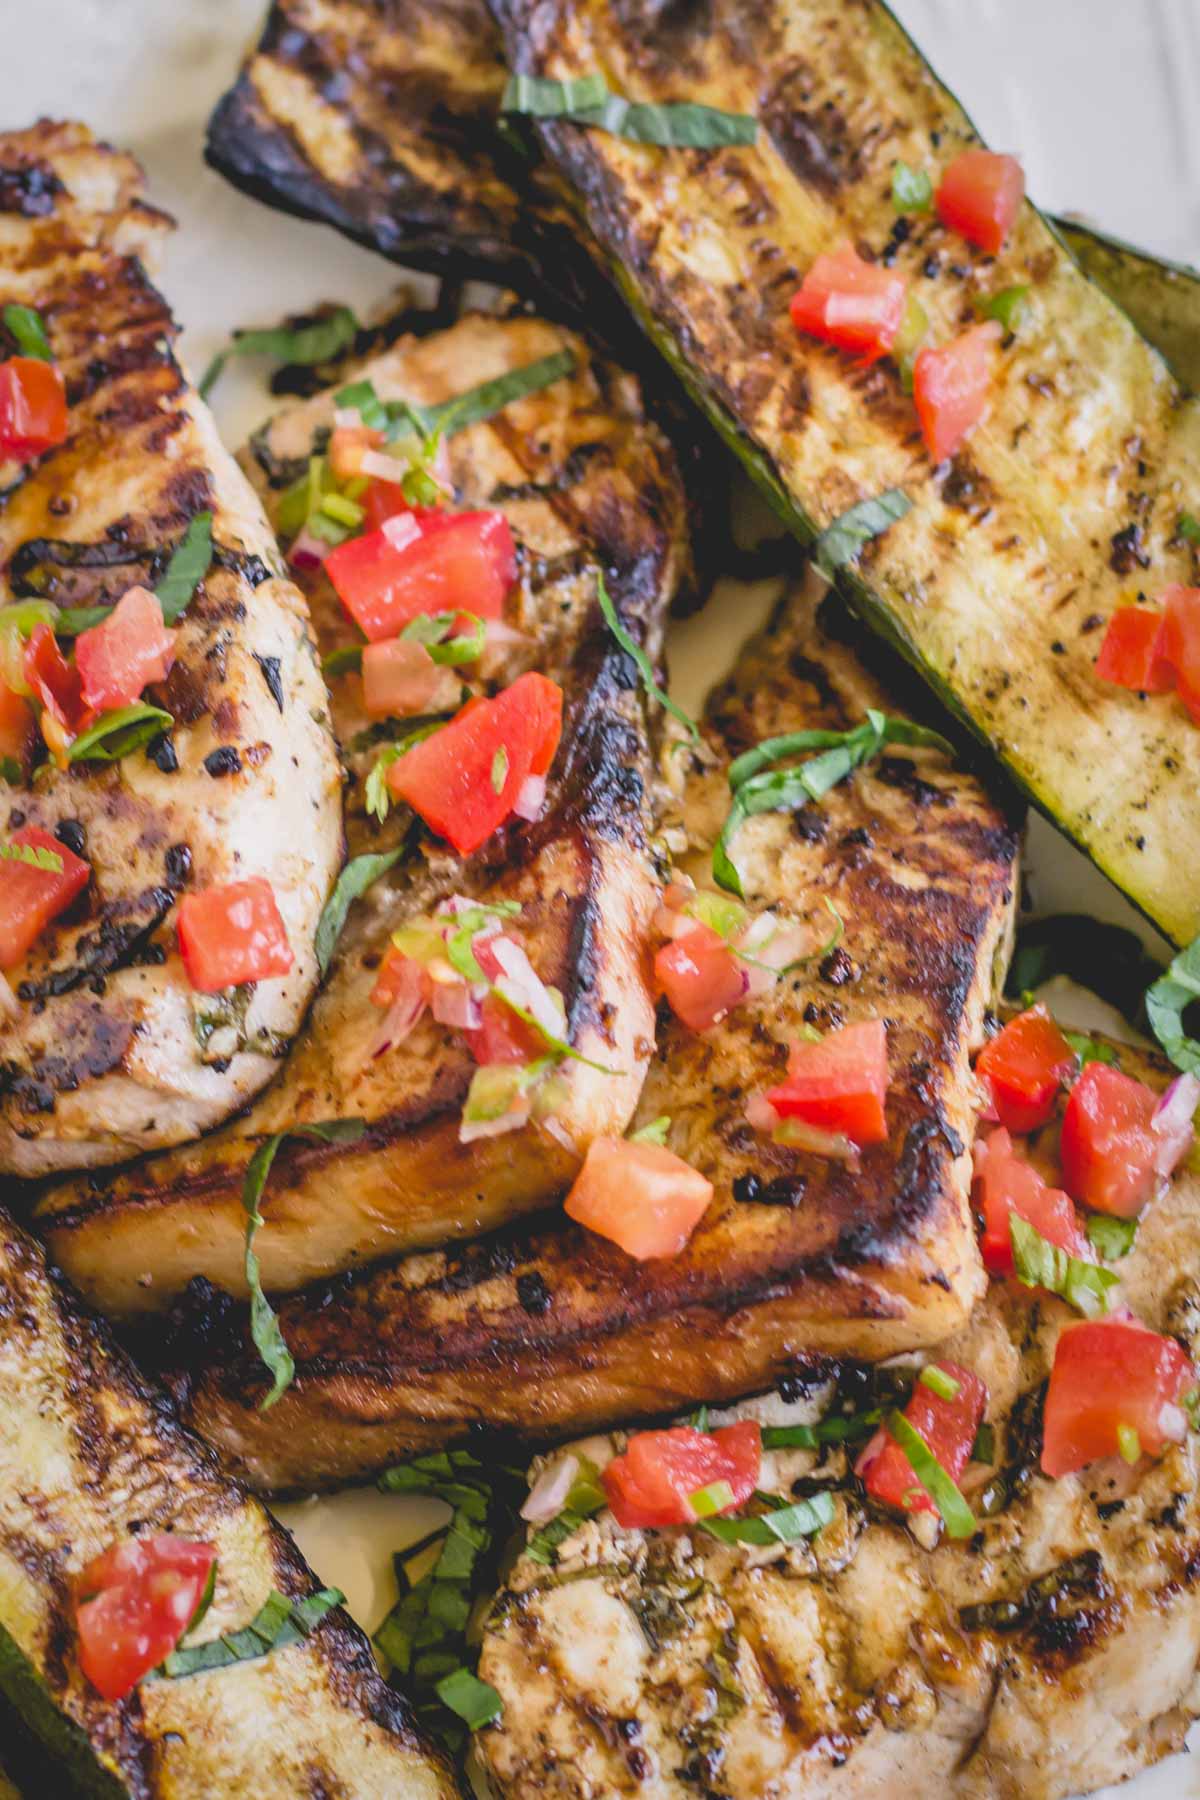 Grilled swordfish steaks topped with chopped tomatoes and fresh herbs.